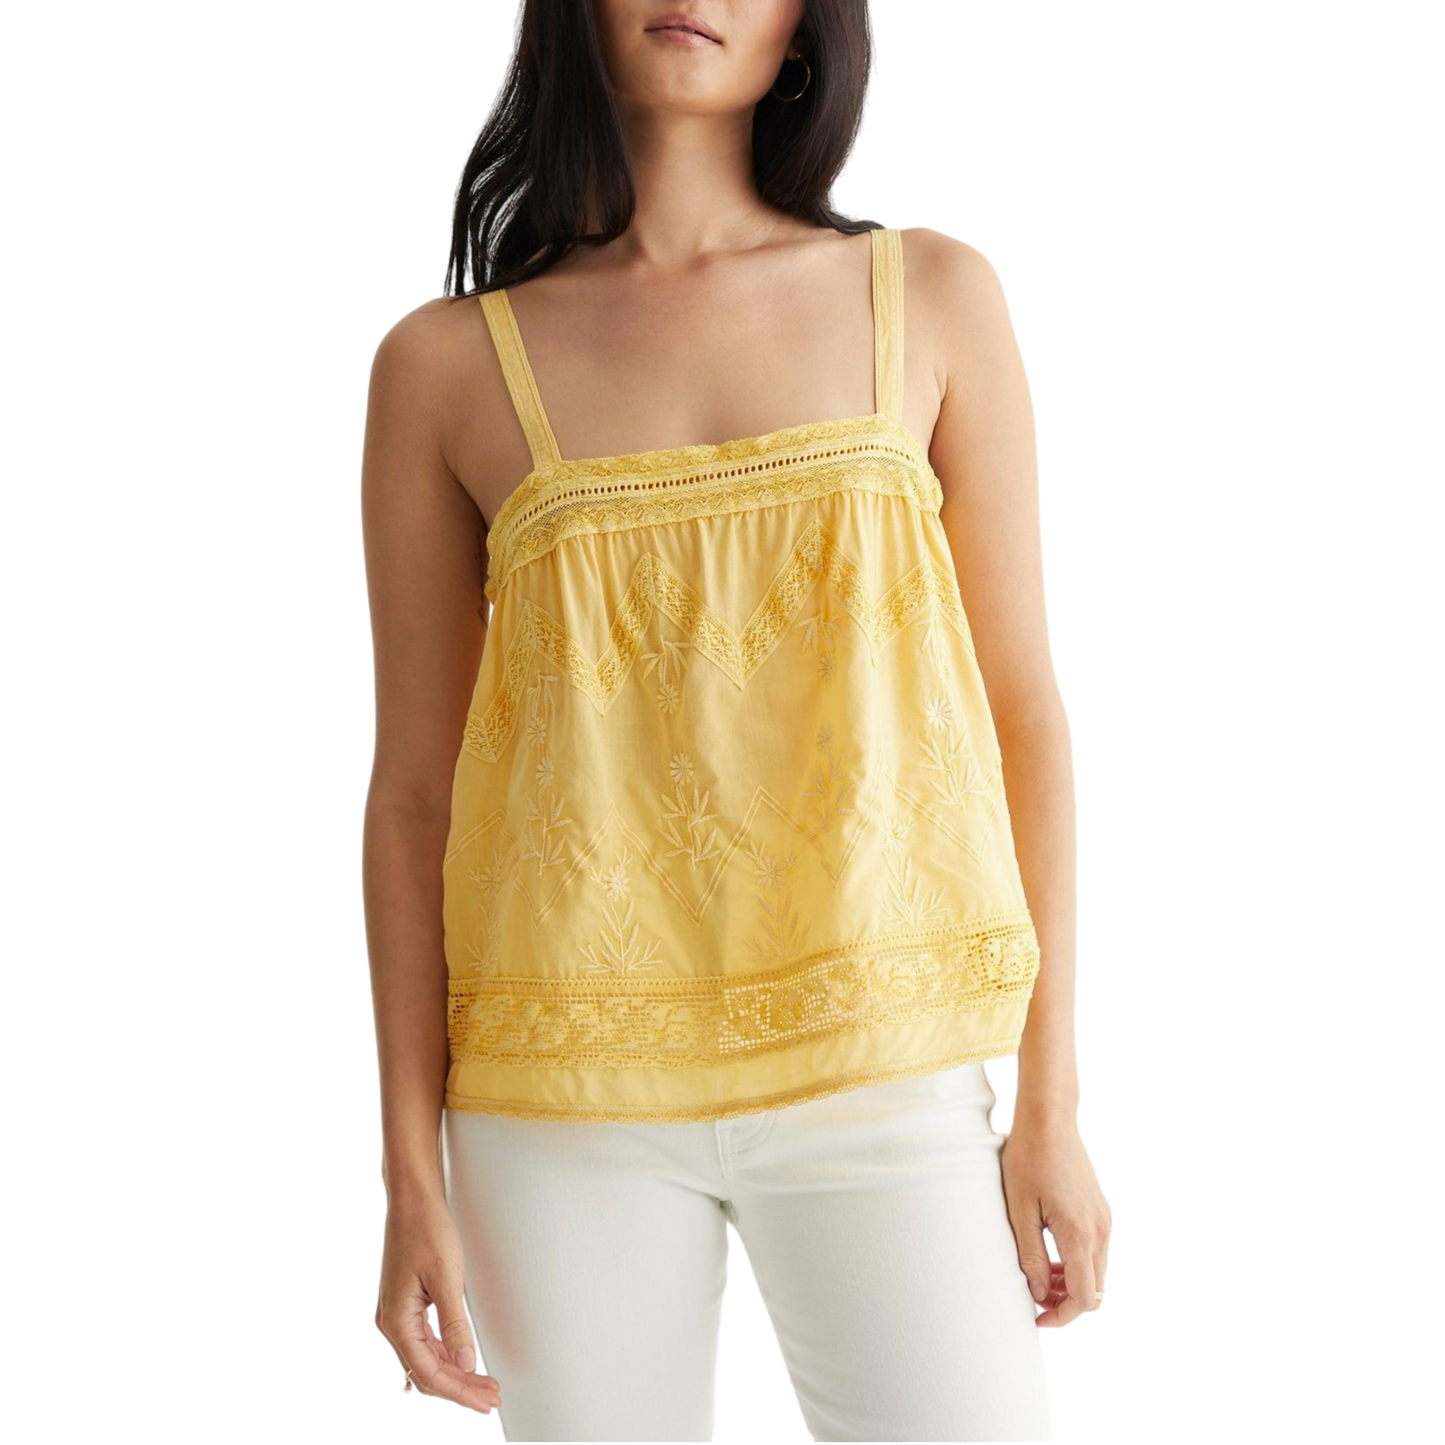 Lucky Brand Women's Embroidery Lace Trim Cotton Camisole Top